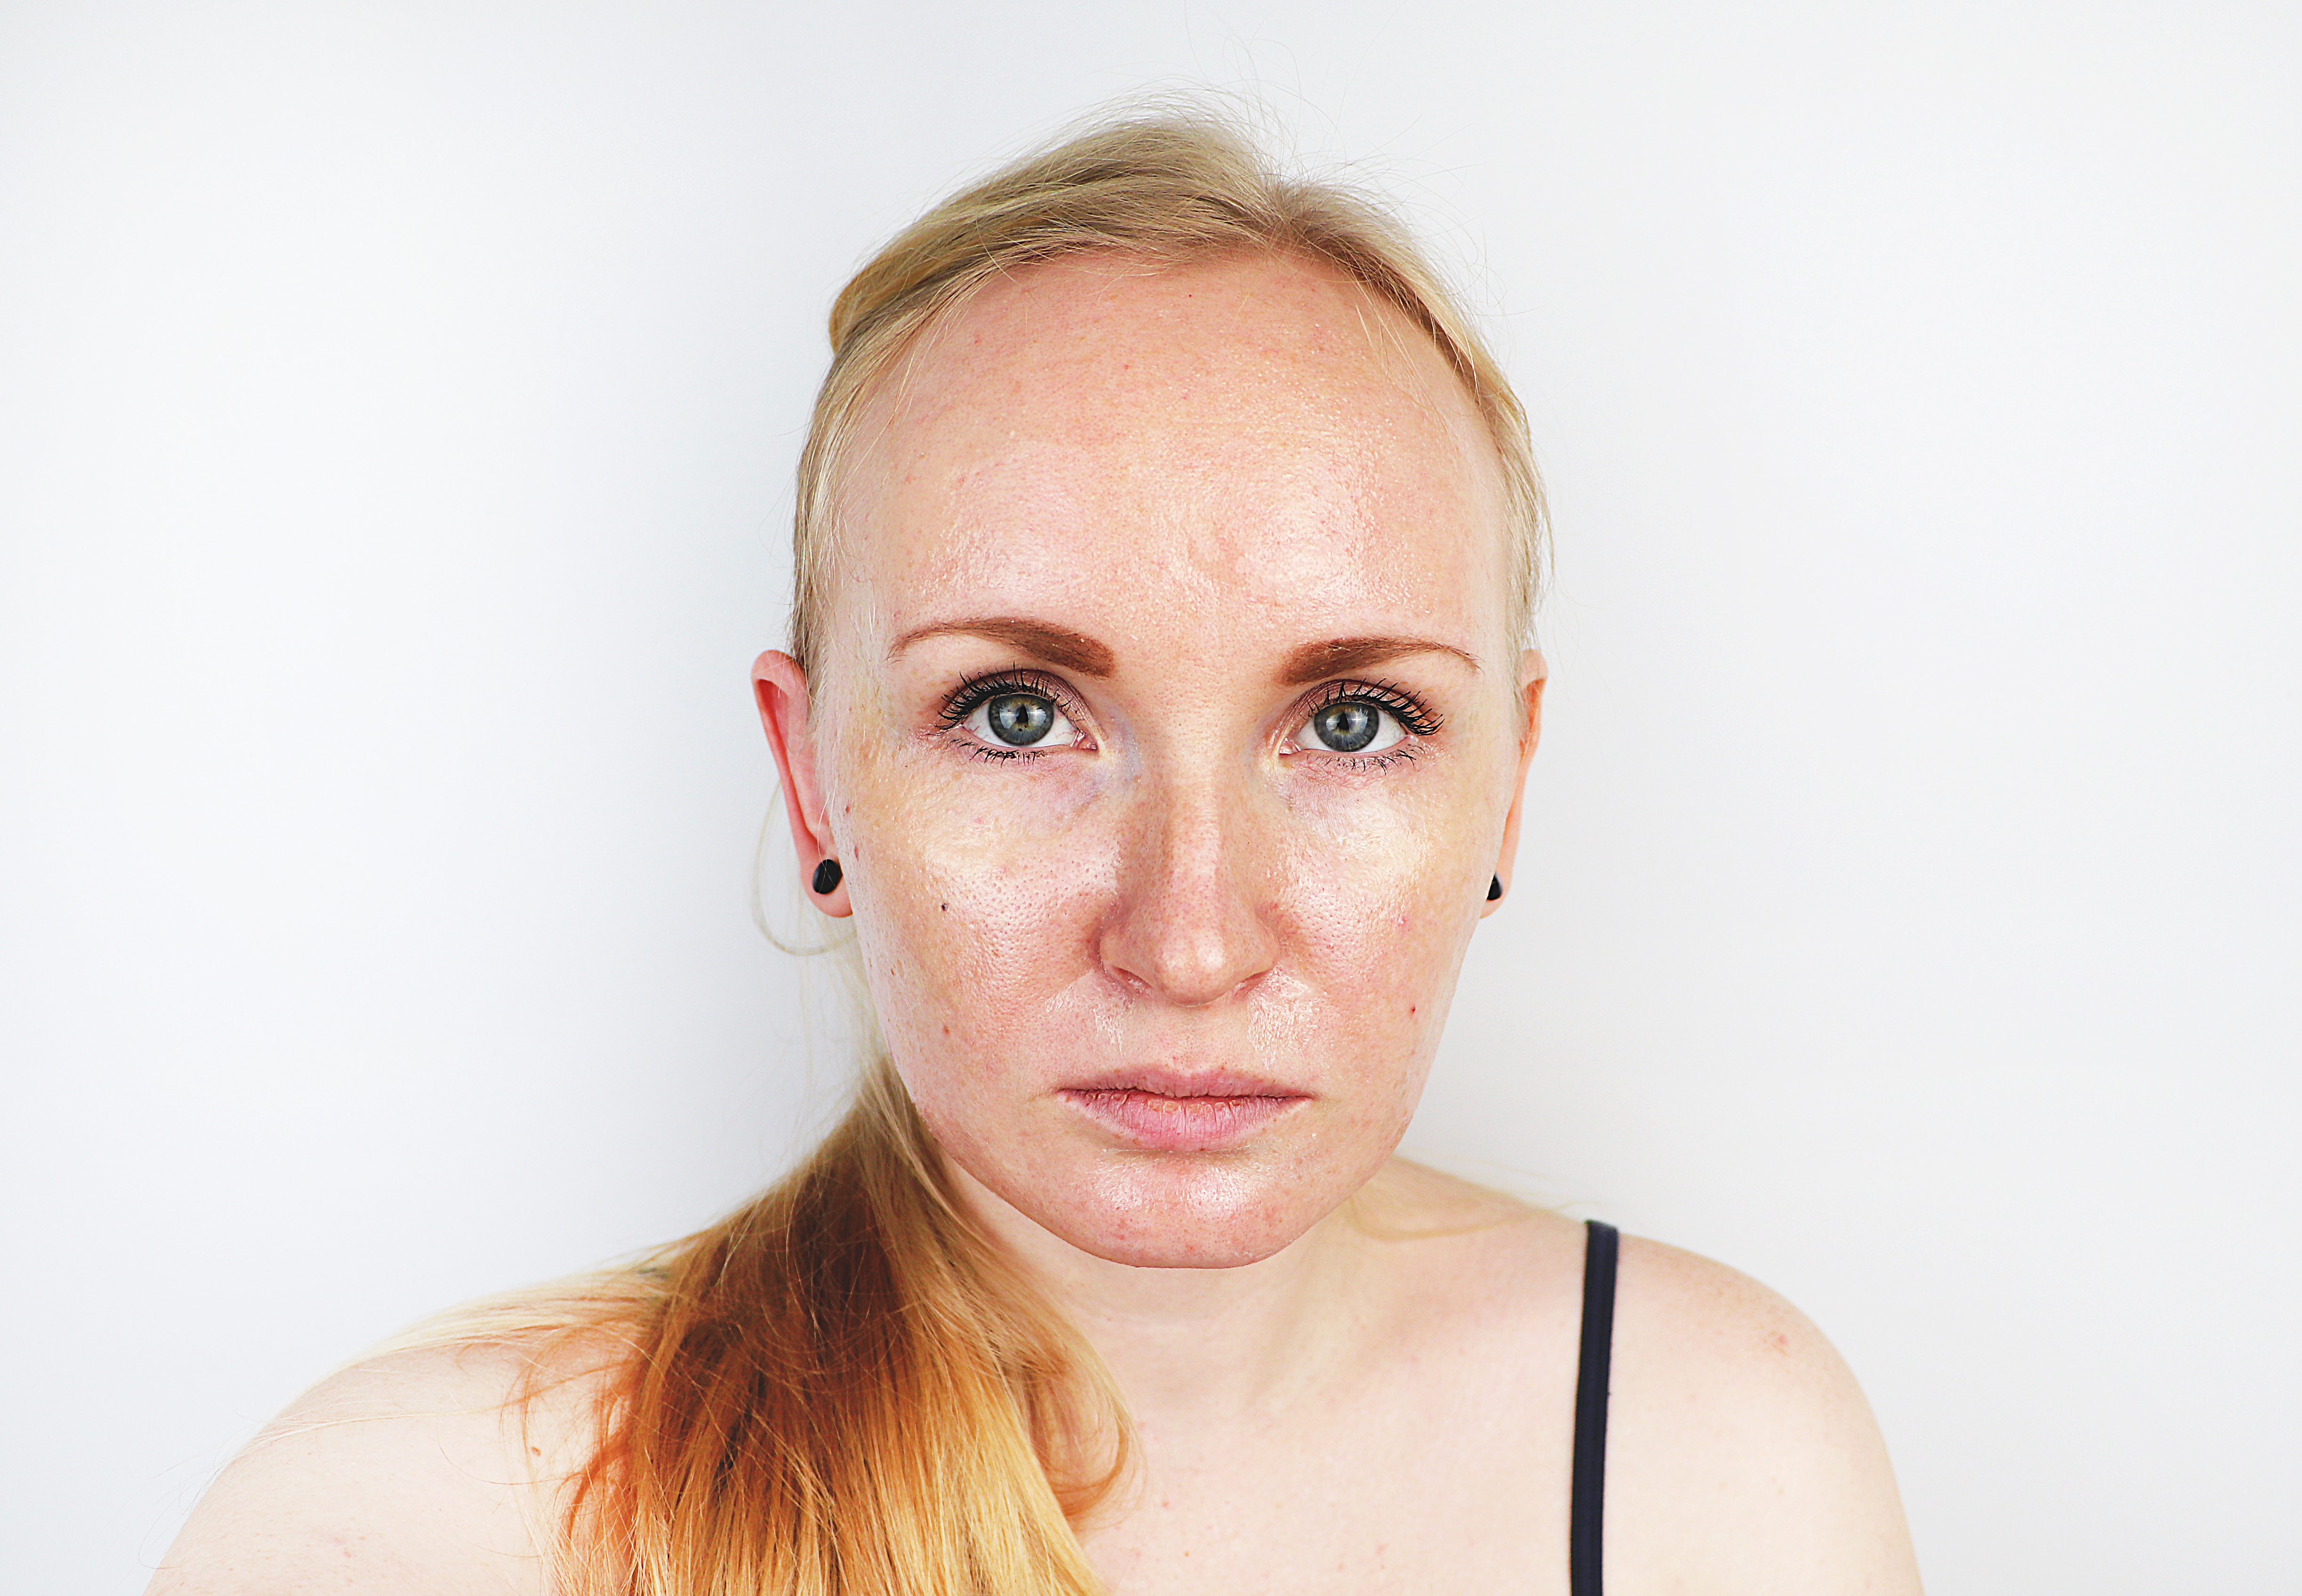 A photo of a woman with oily skin | Source: Shutterstock